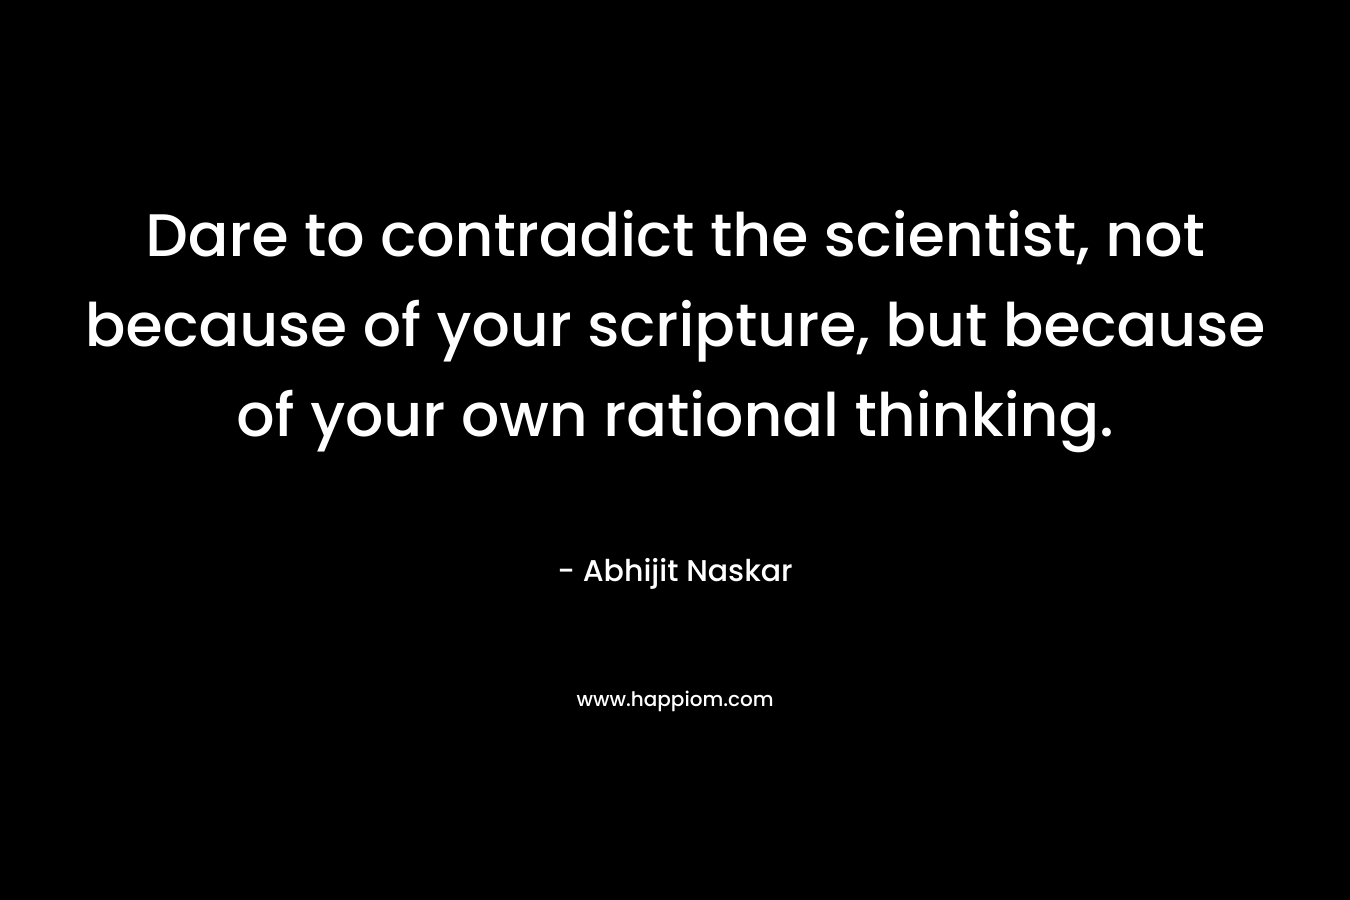 Dare to contradict the scientist, not because of your scripture, but because of your own rational thinking. – Abhijit Naskar